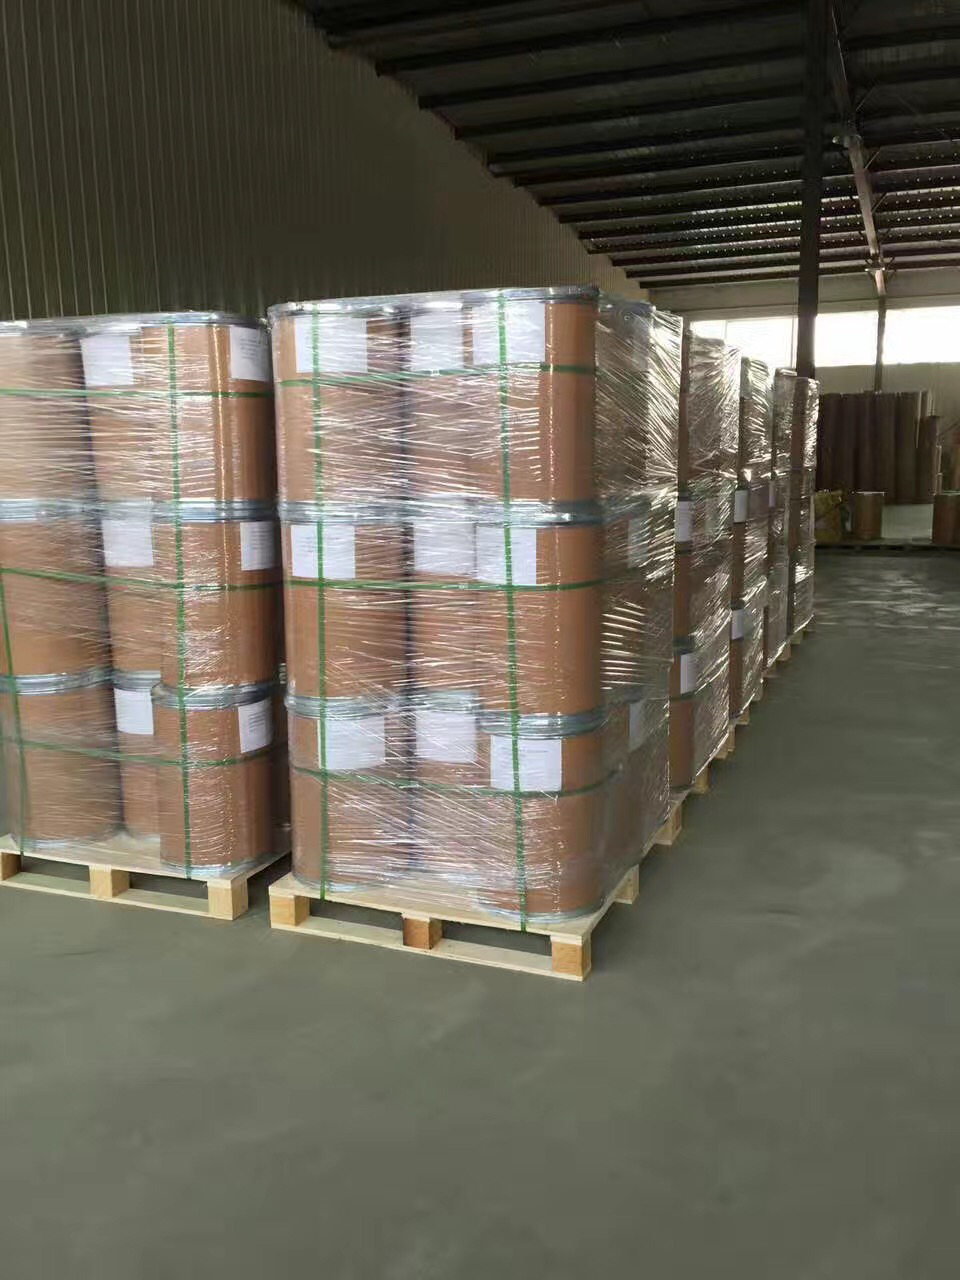 The Pakistani Customer’s Order For Optical Brightening Agent OB-1 Is Ready For Shipment